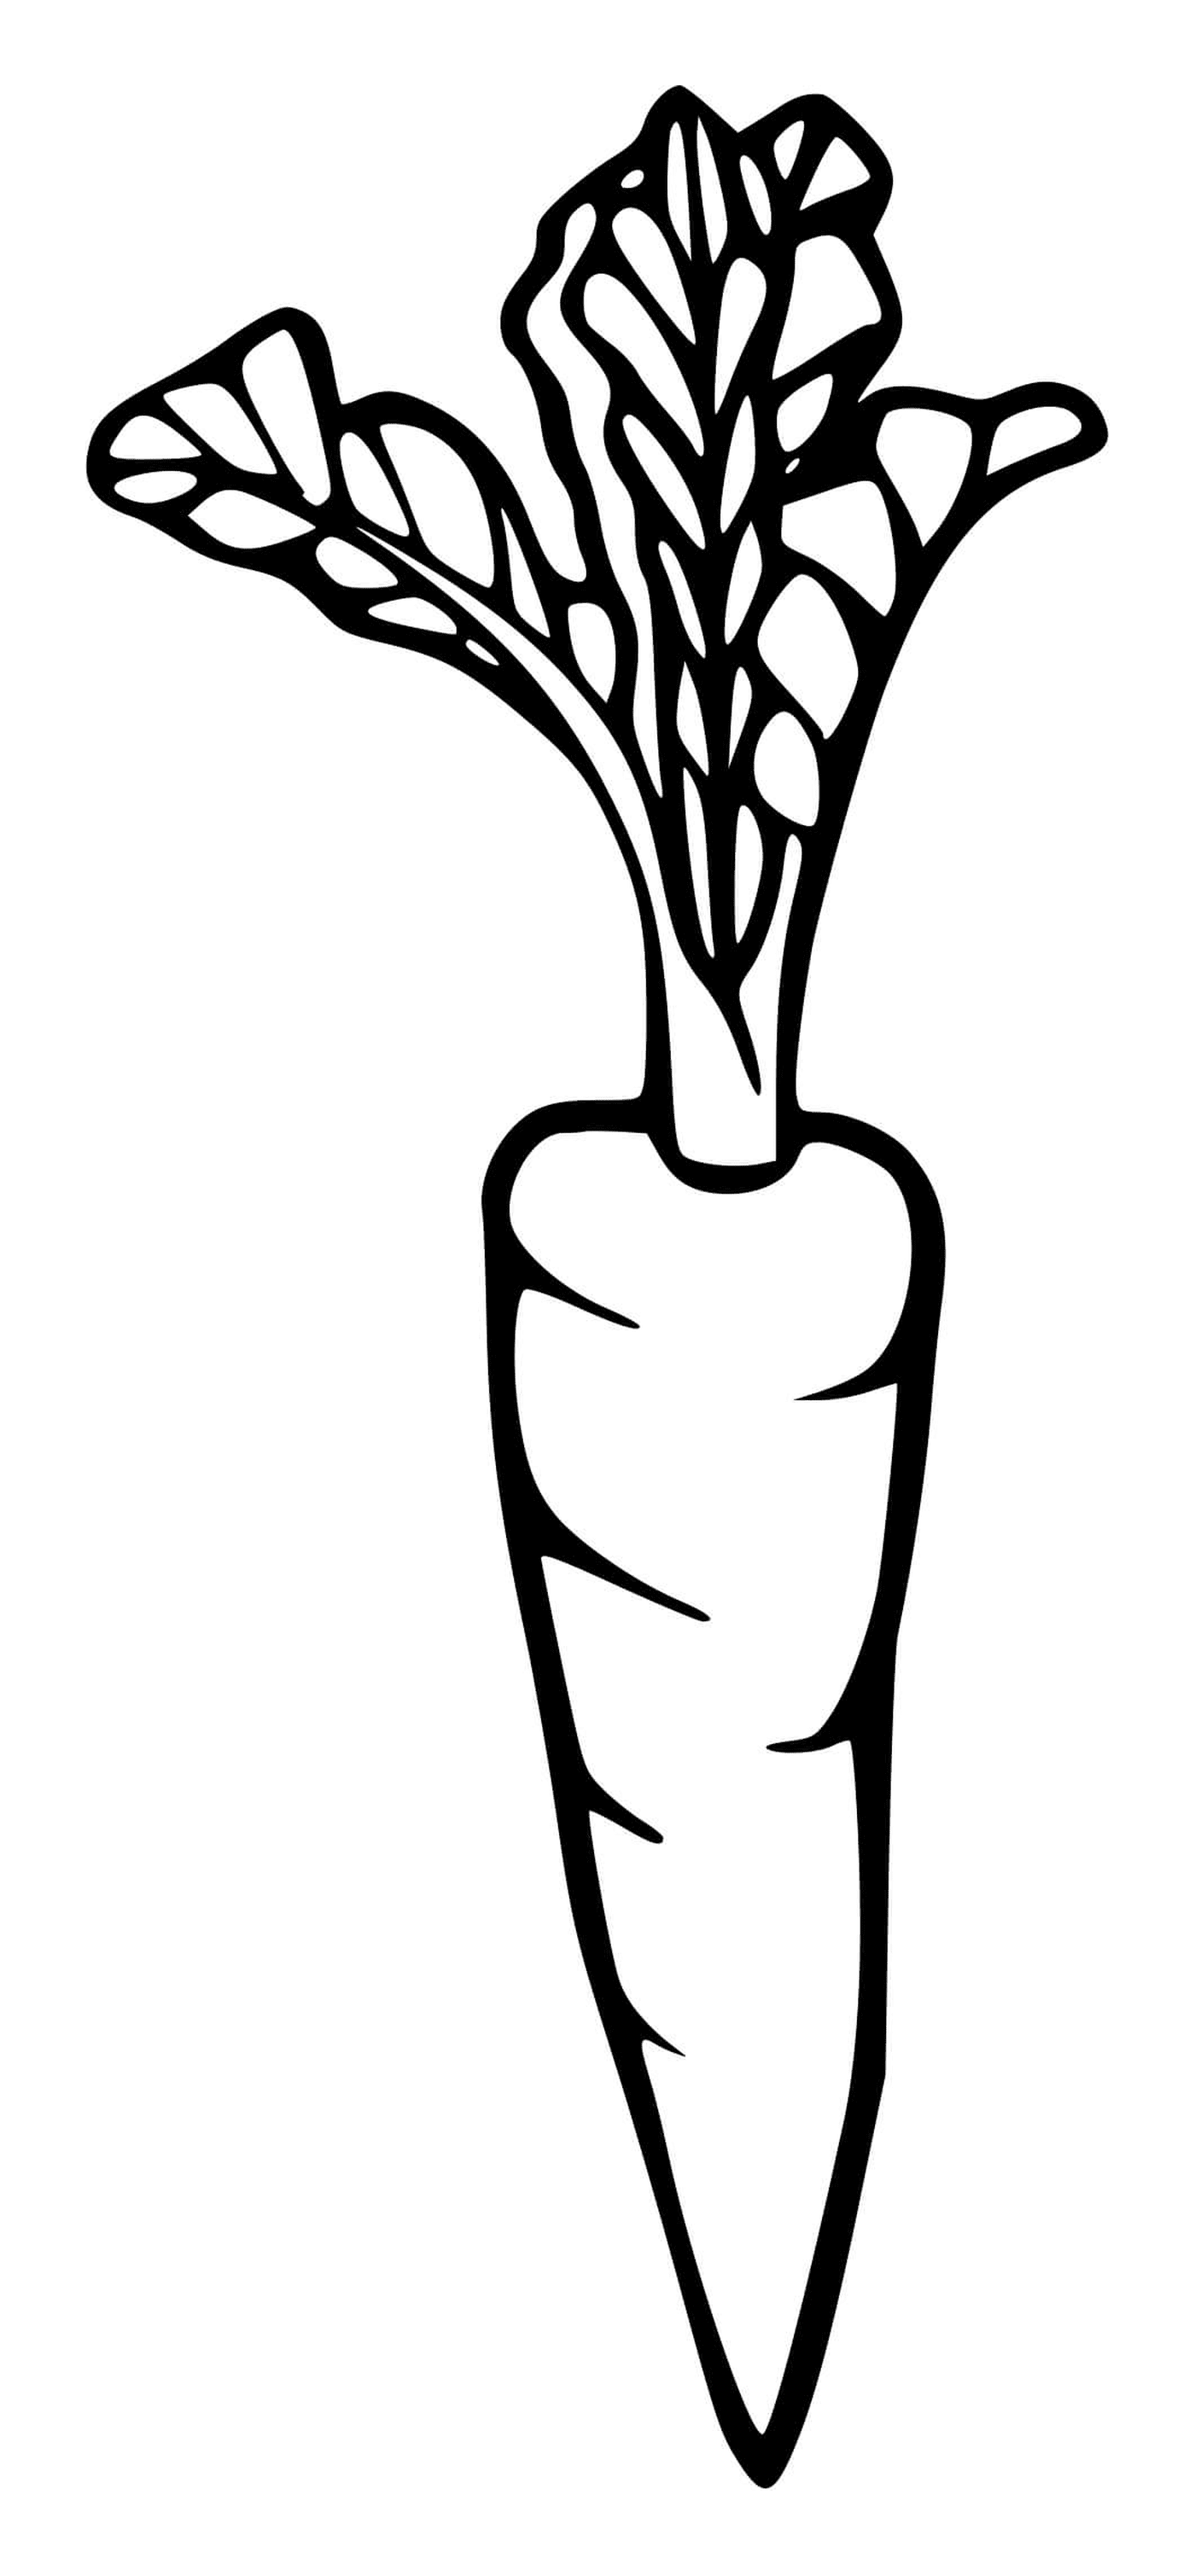  Simple carrot, a carrot 